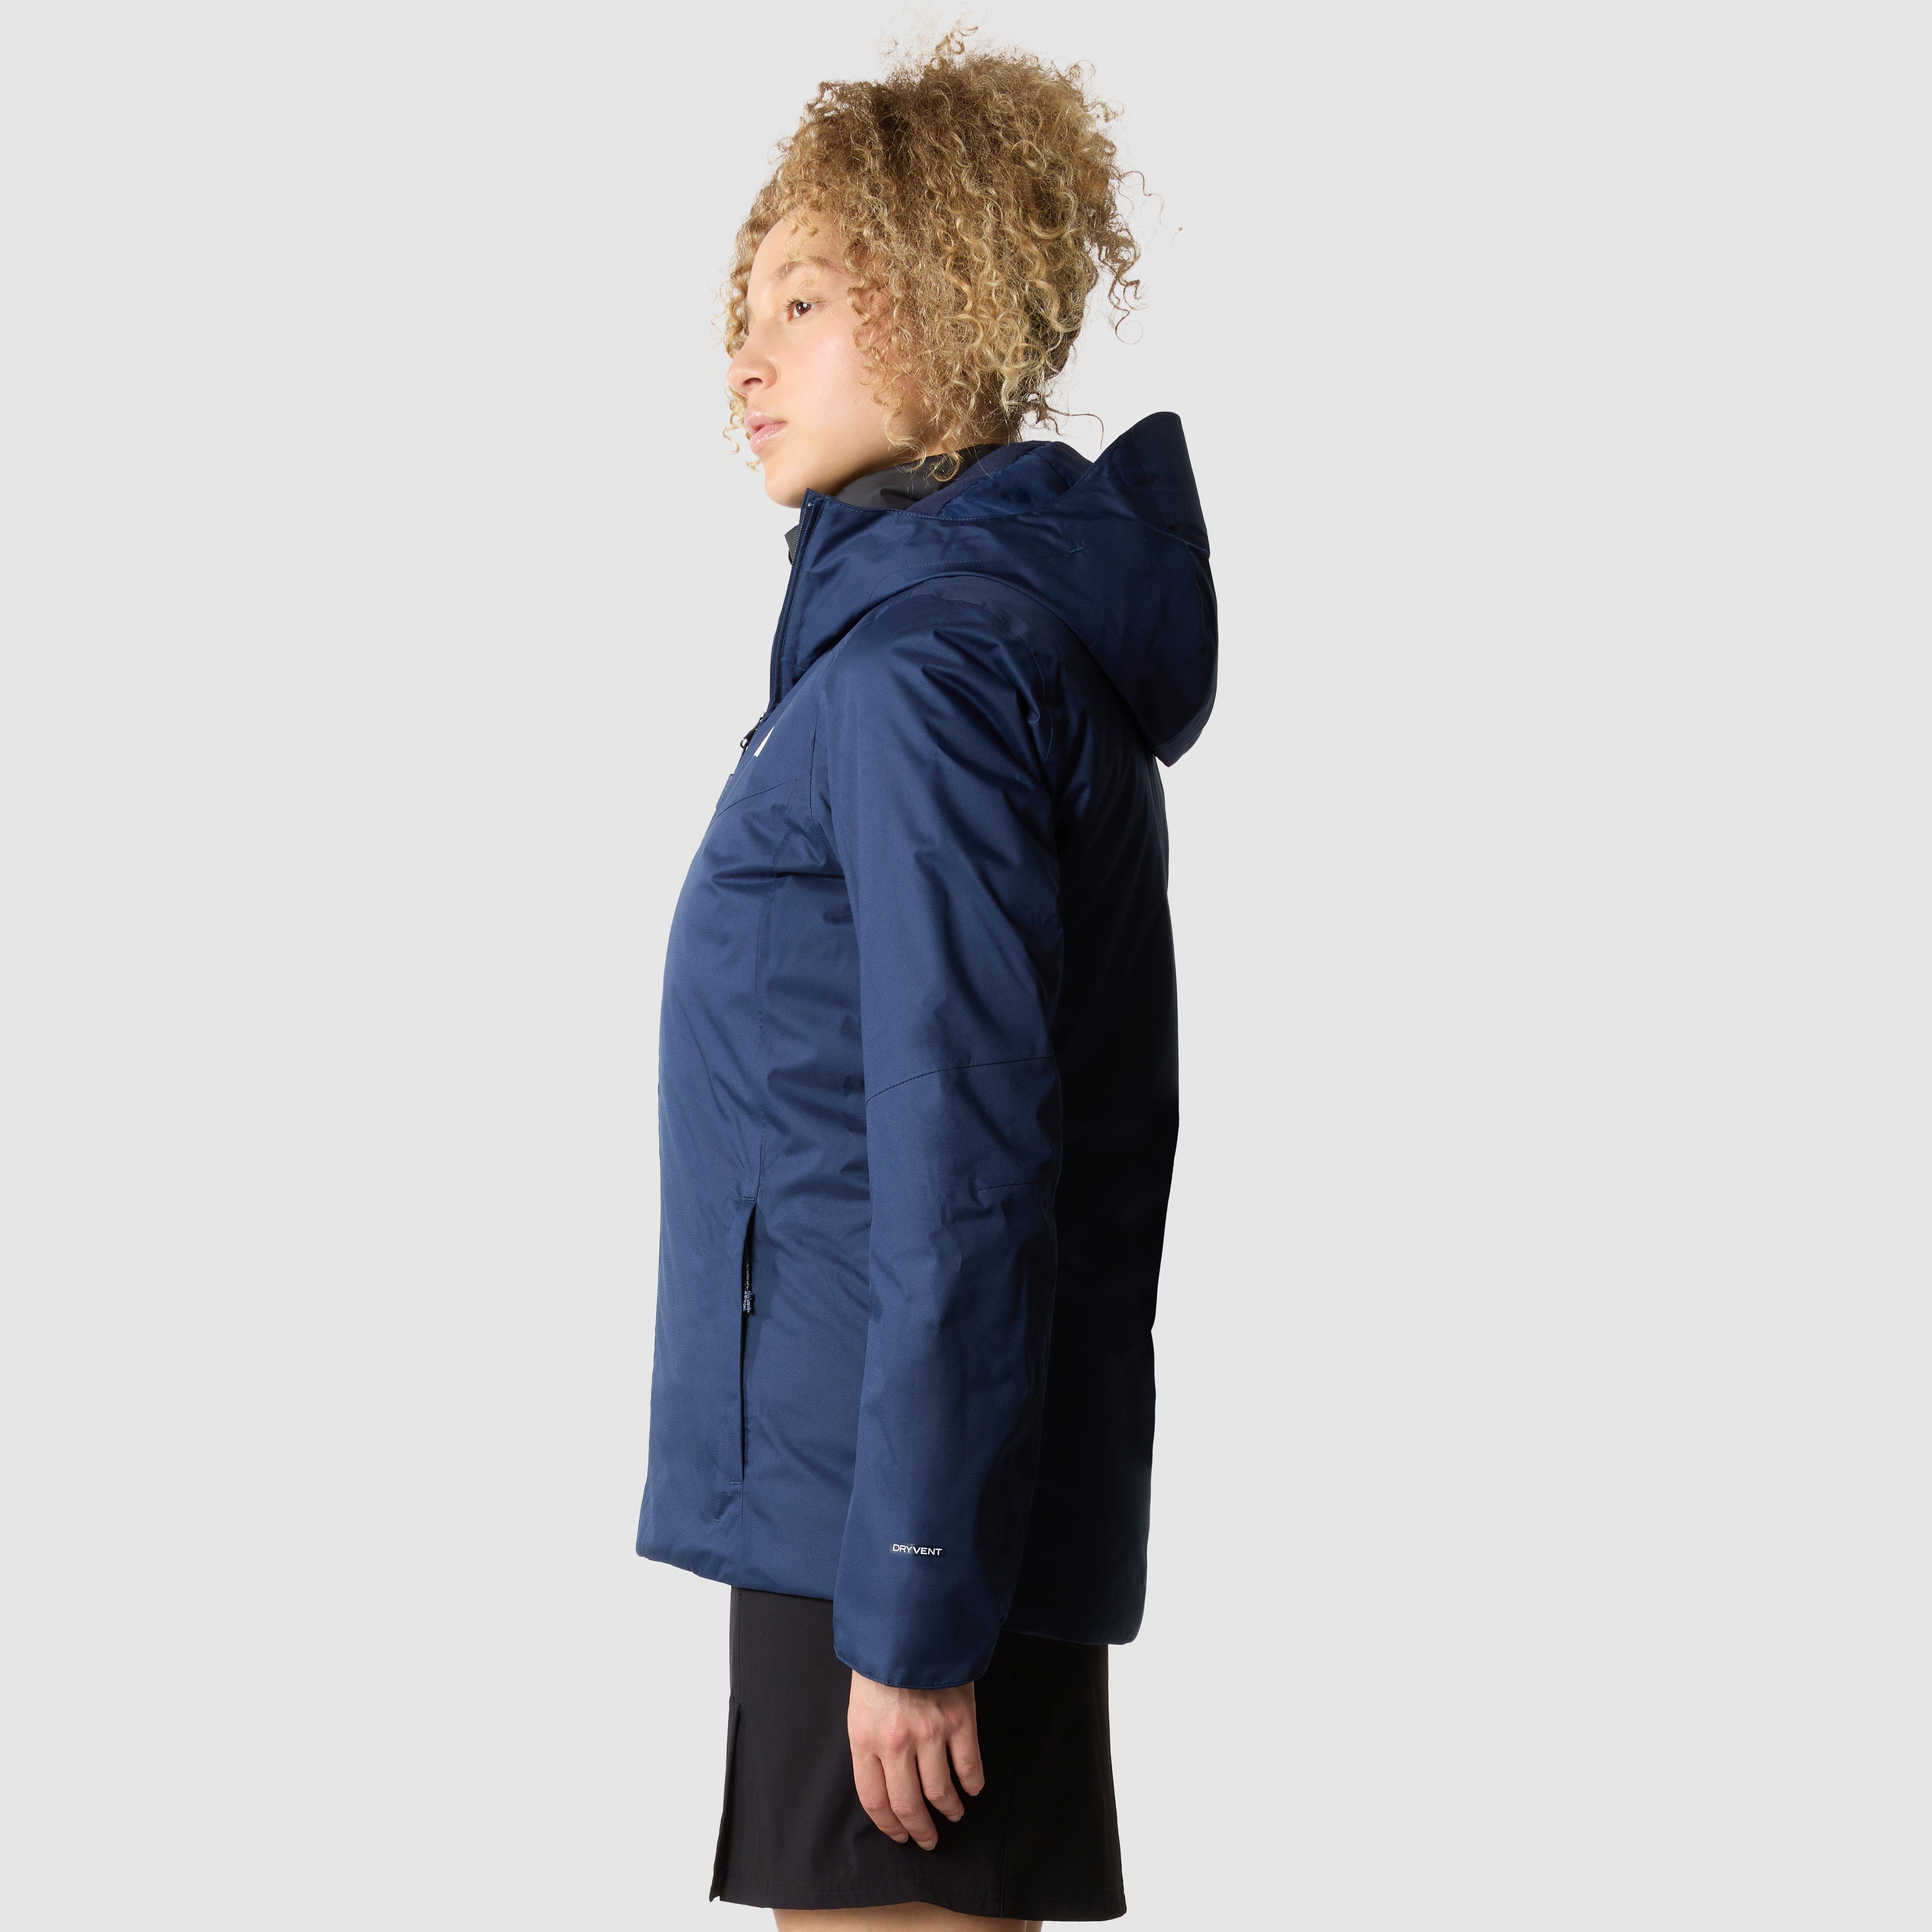 The W North Logodruck Face Funktionsjacke INSULATED QUEST mit JACKET